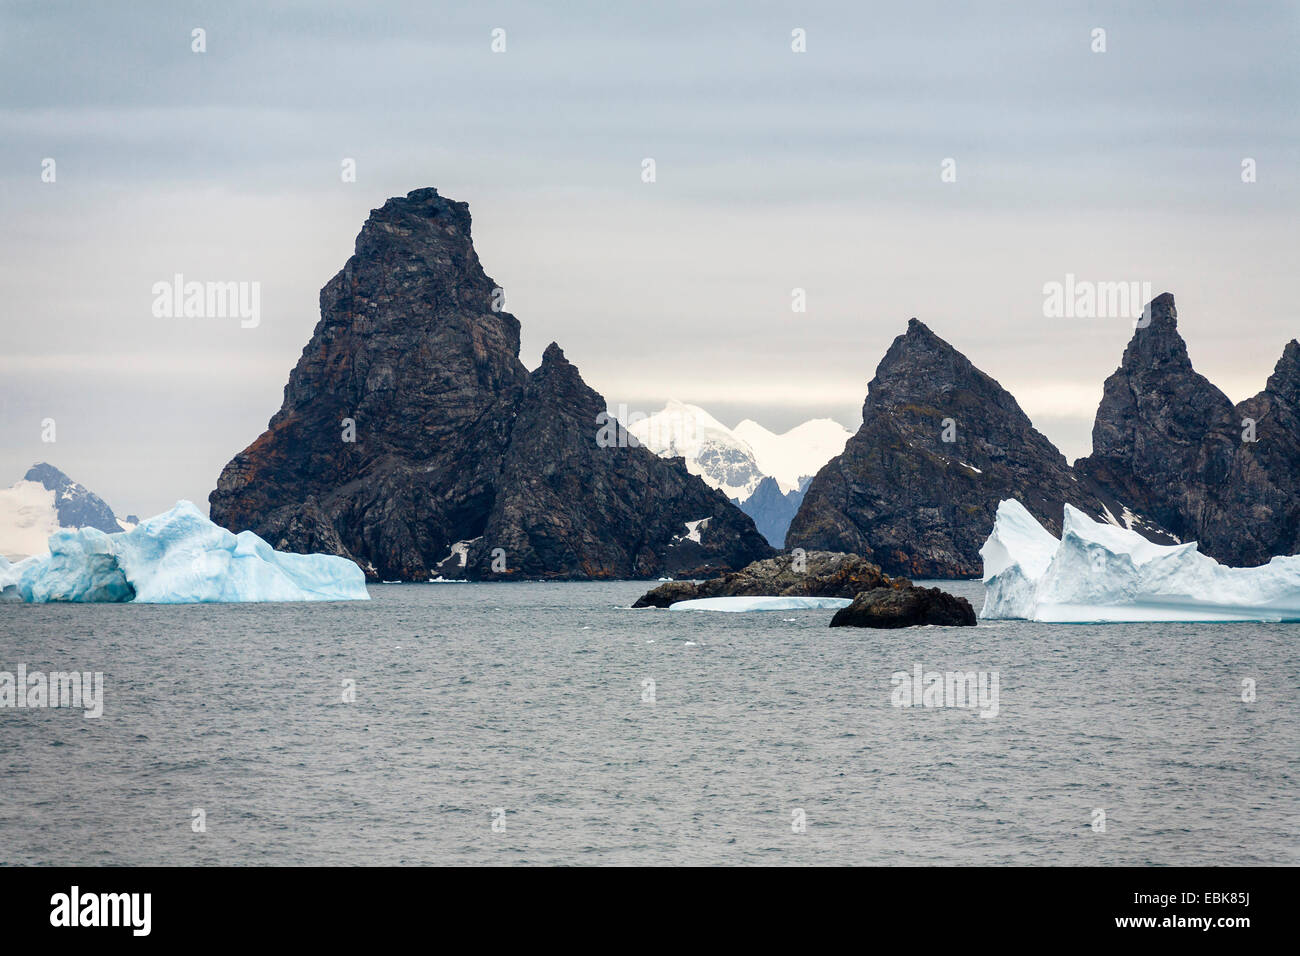 Laurie Island, part of the South Orkneys, at the Washington Strait in the South Polar Ocean, Antarctica, South Orkney Islands, Washington Strait, Laurie Island Stock Photo